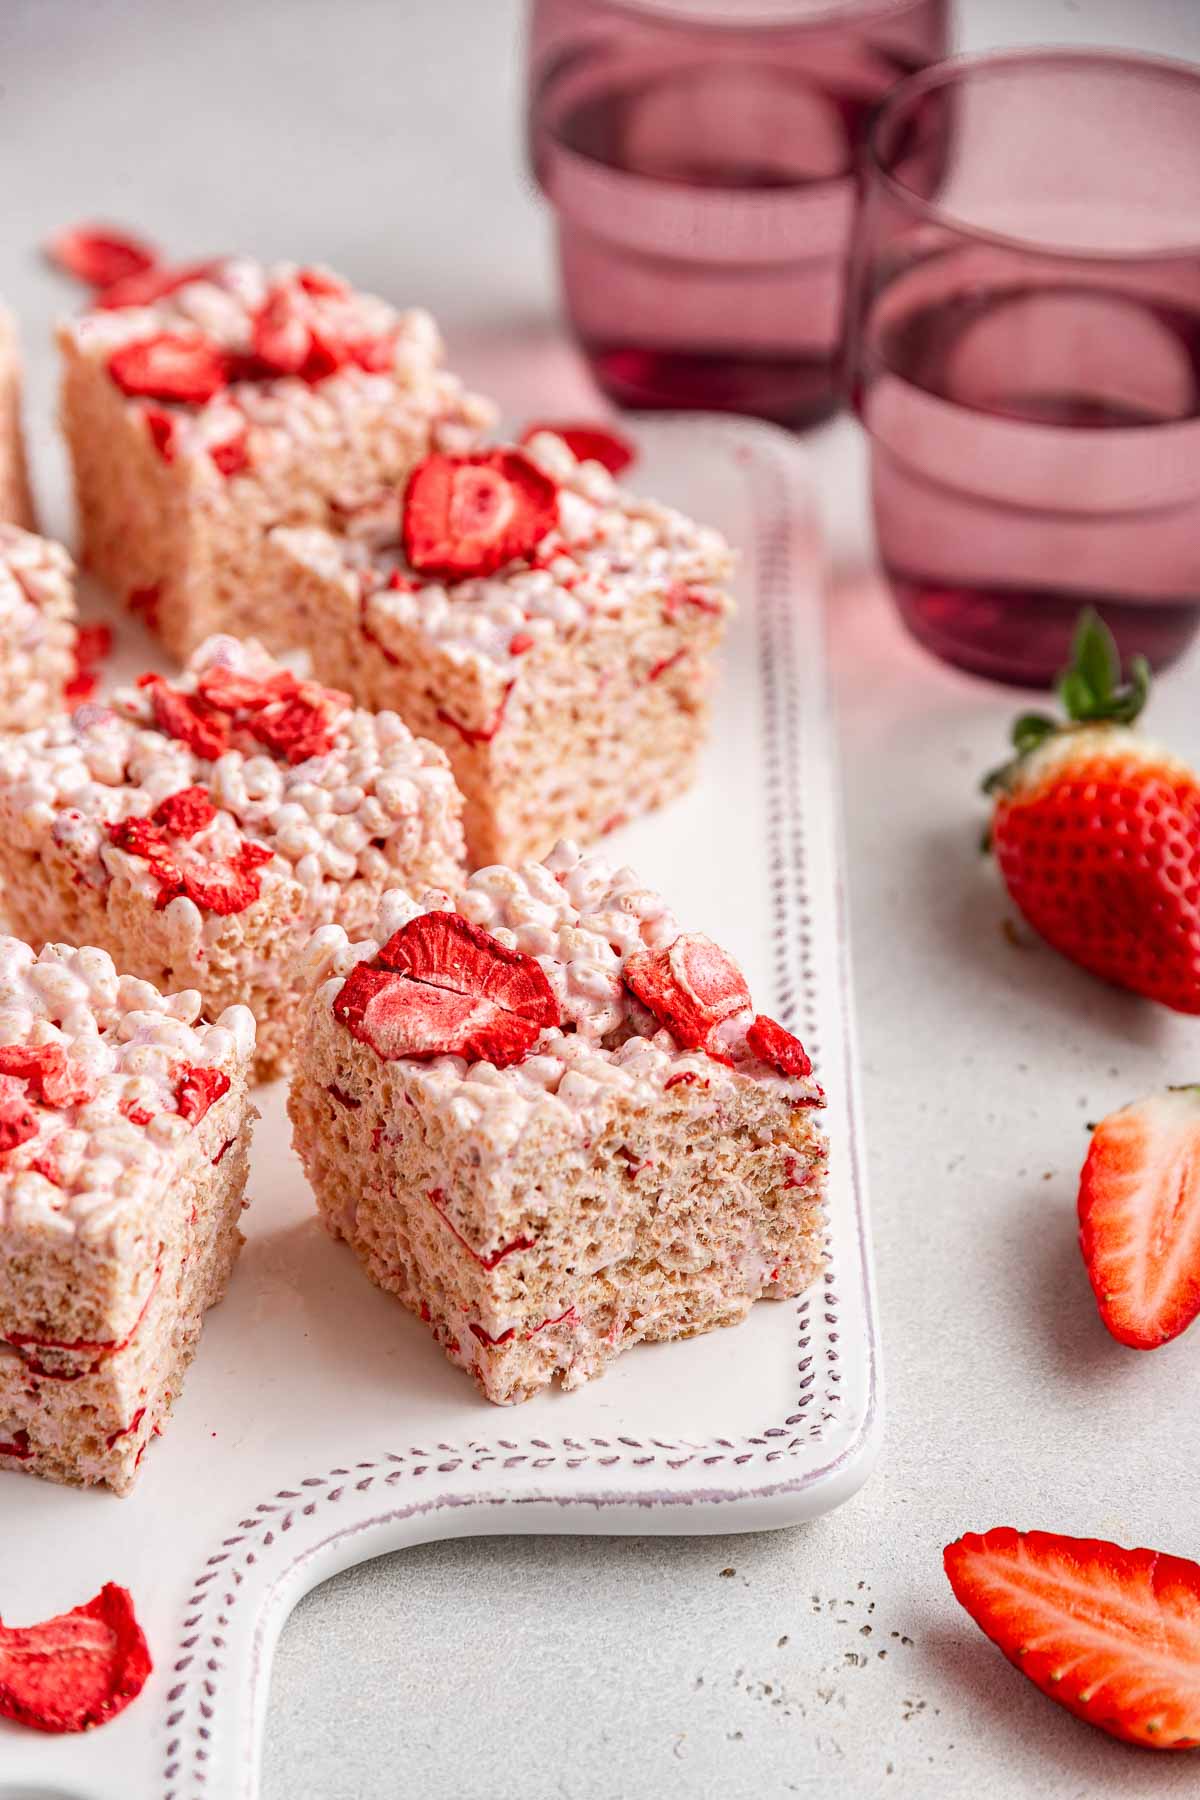 Rice Krispies treats with strawberries on top.